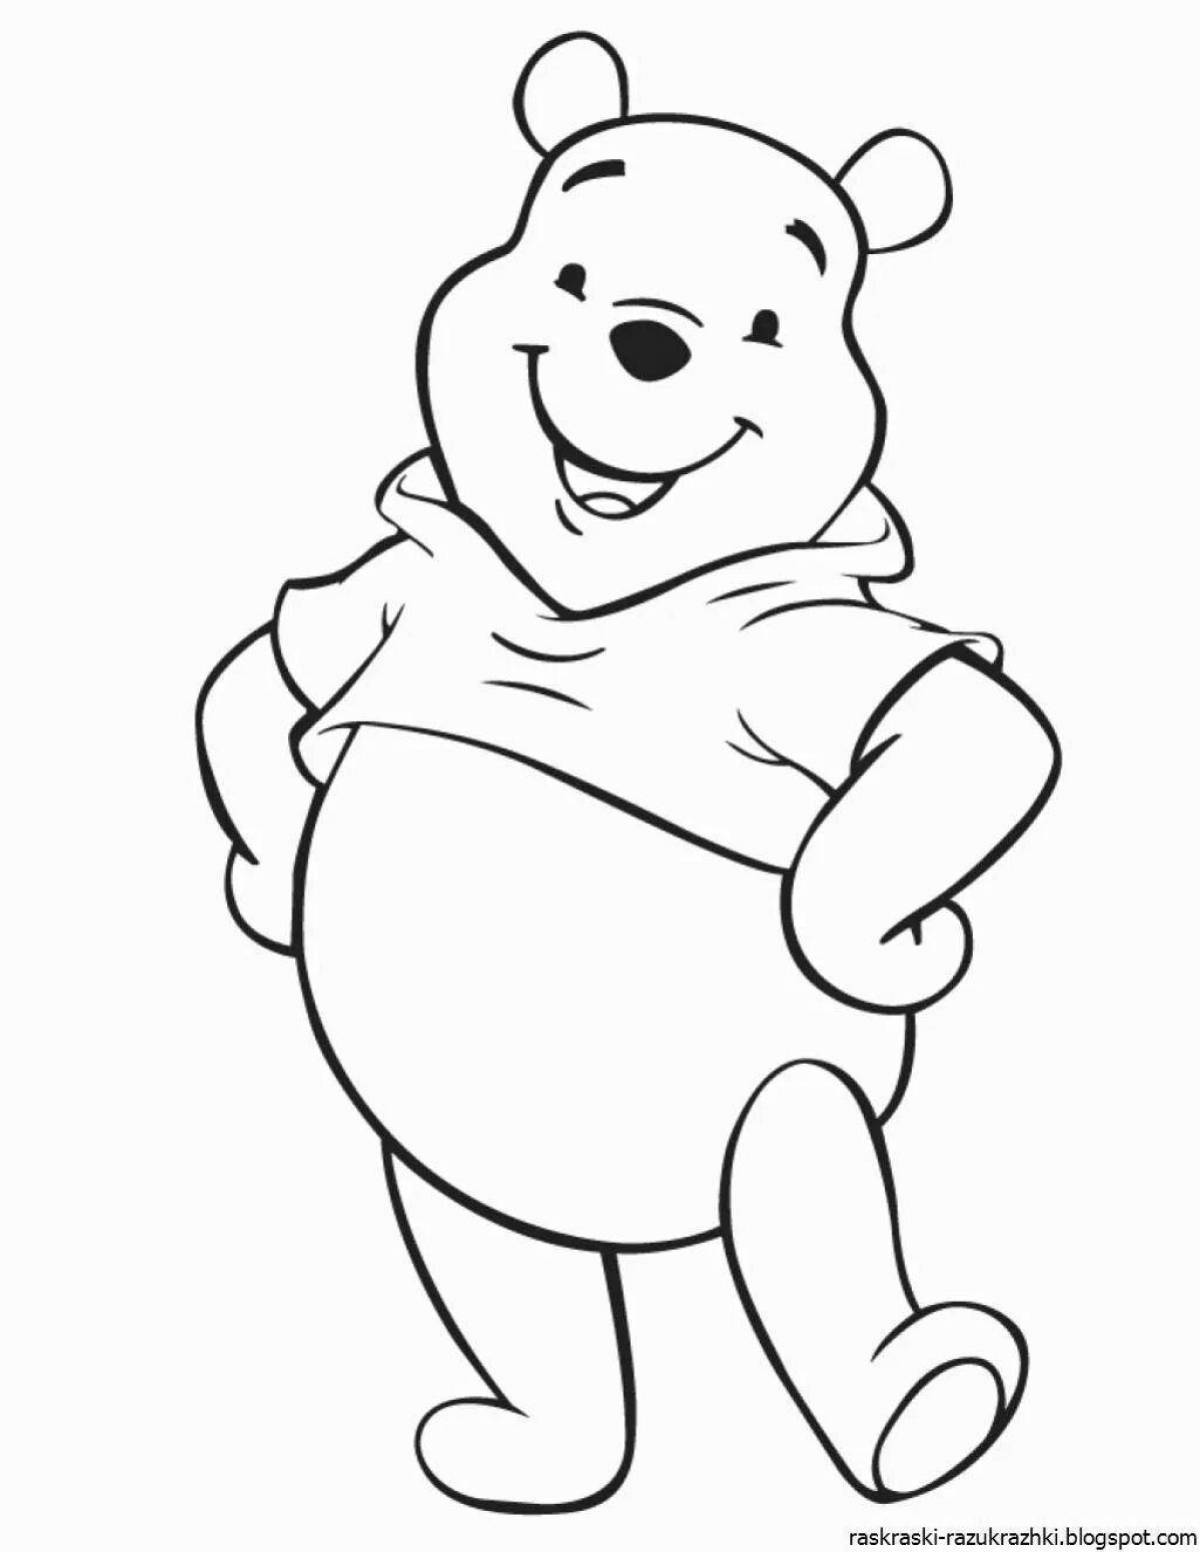 Radiant winnie the pooh coloring book for kids